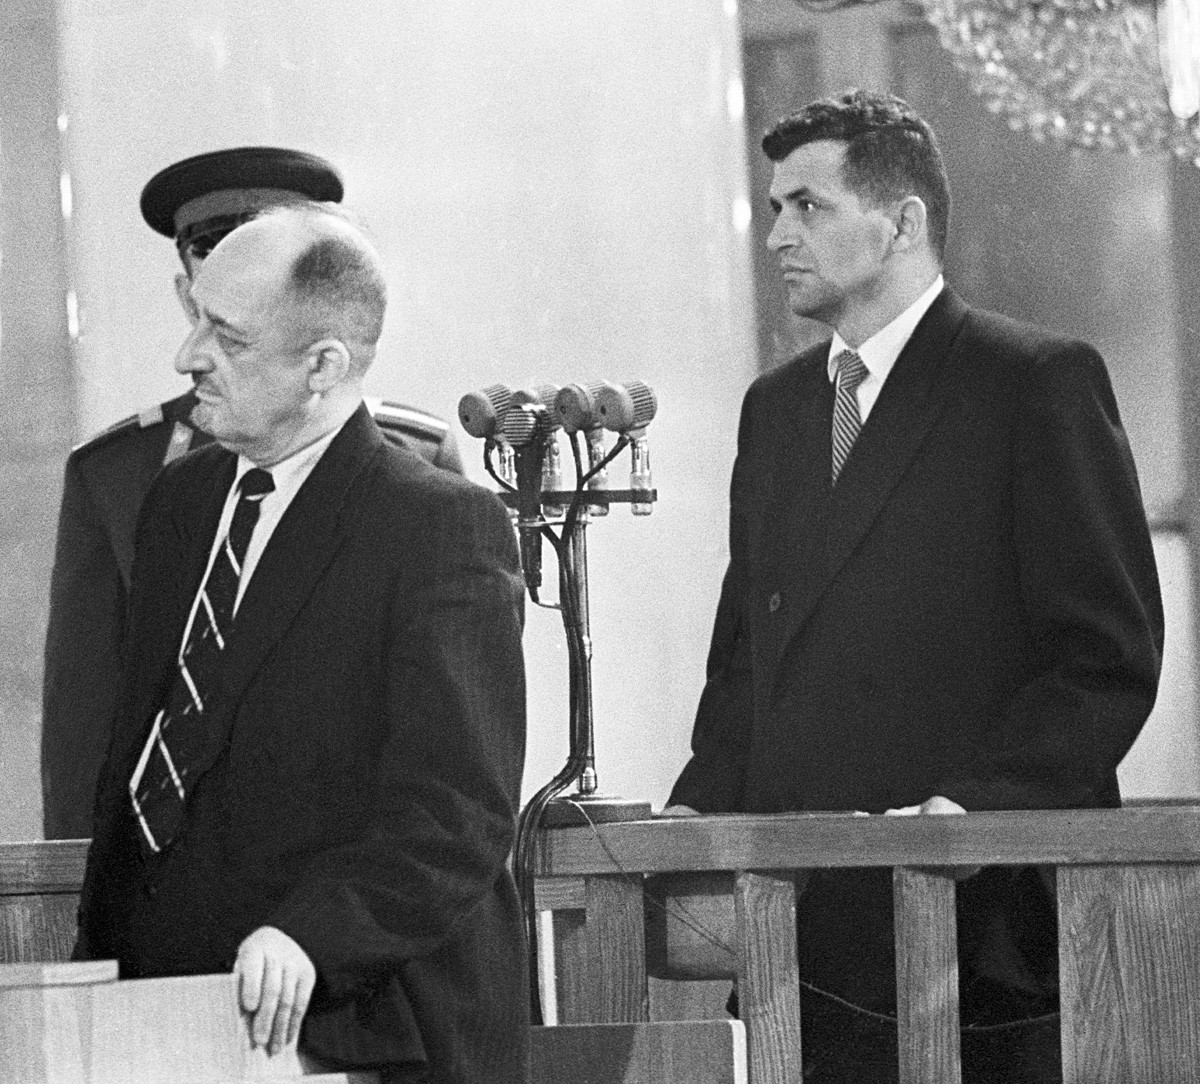  American pilot Francis Gary Powers (R) hears out the verdict of the Military Board of the USSR Supreme Court on August 19, 1960 during an open session in the Pillar Hall of the House of the Unions.